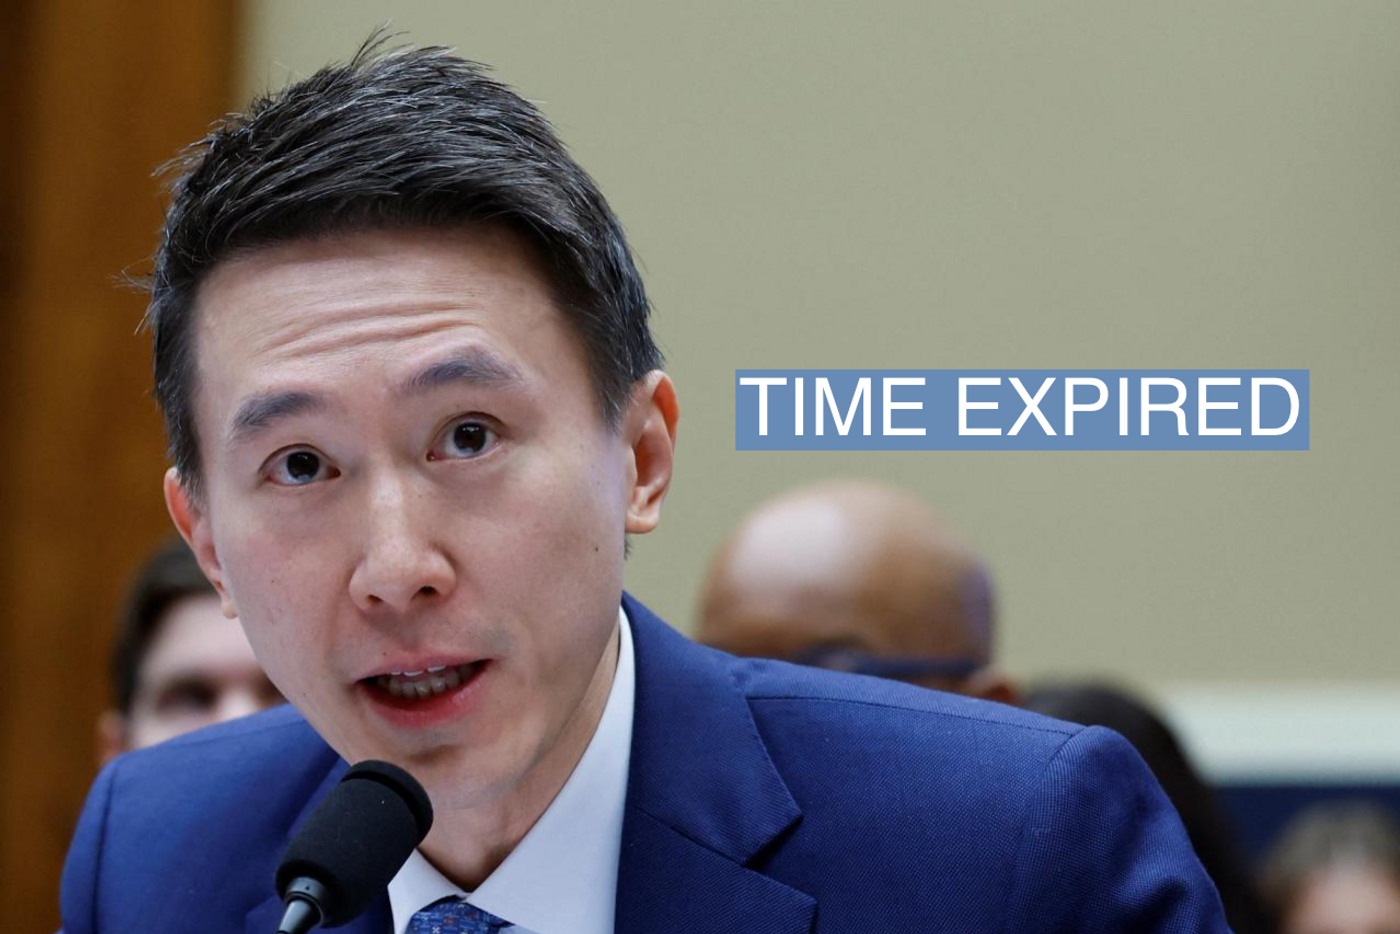 TikTok CEO Shou Zi Chew testifies before the House Energy and Commerce Committee.